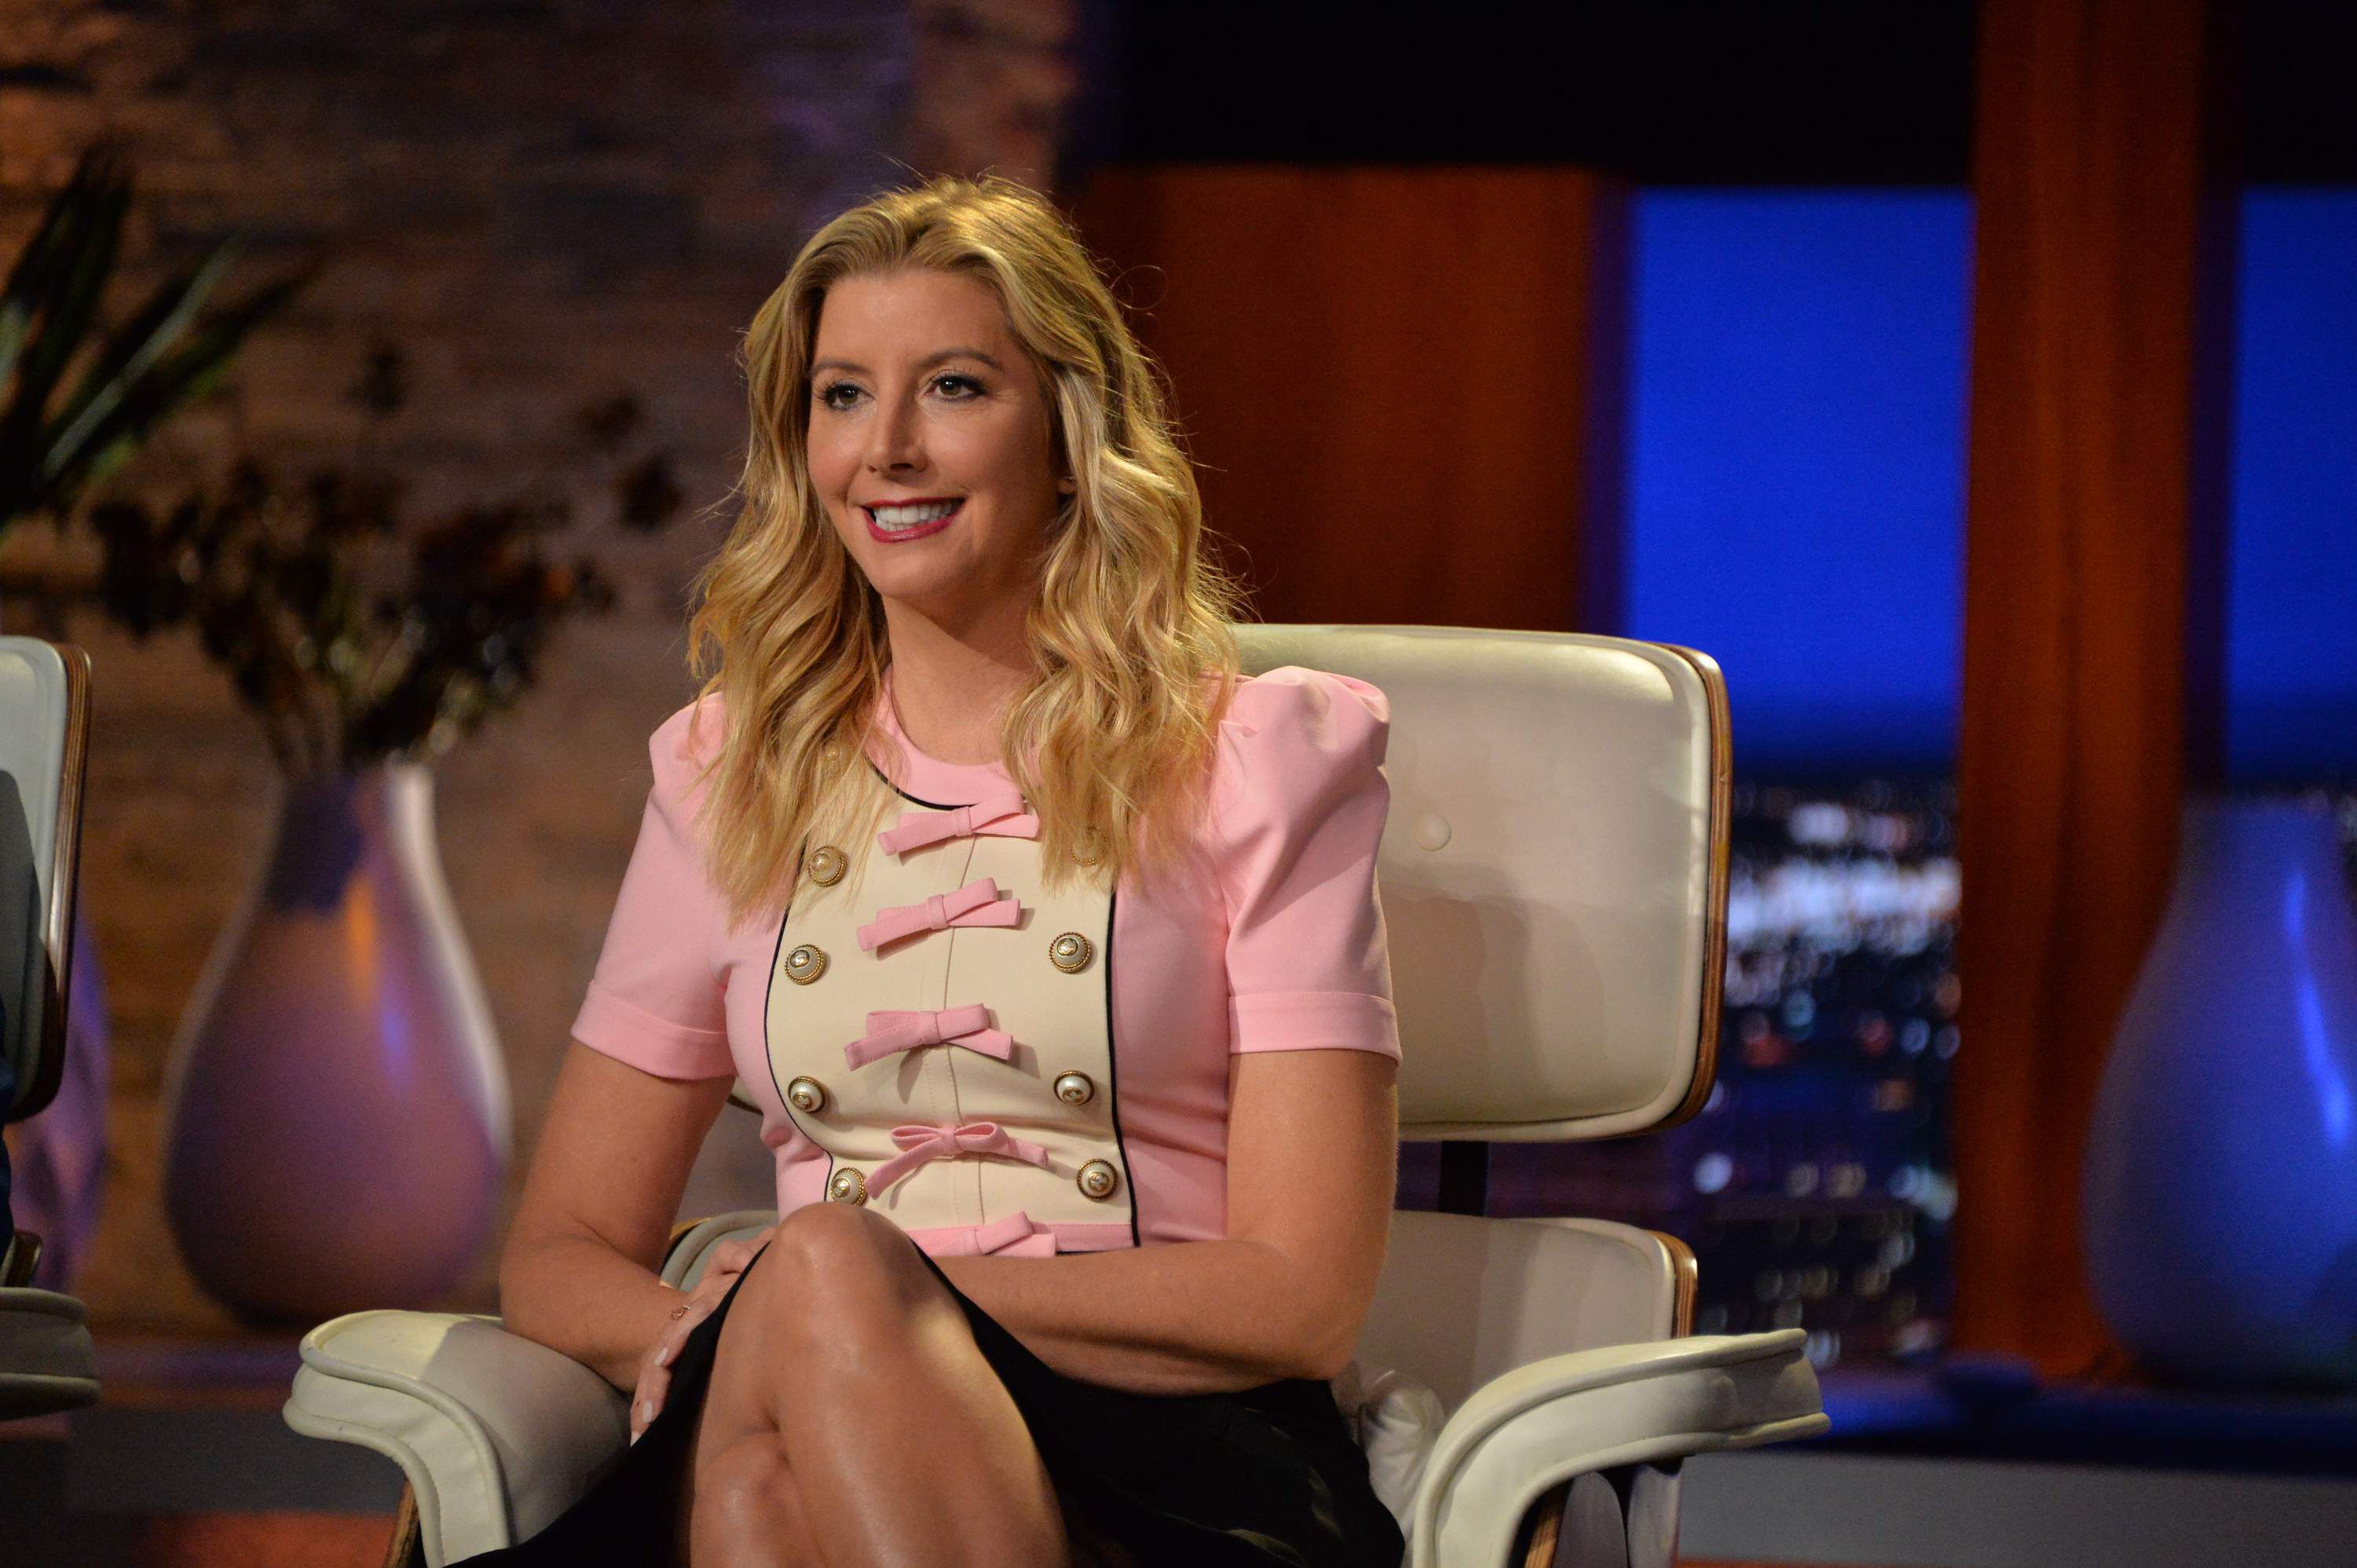 We chat live with SPANX founder and CEO Sara Blakely about arm